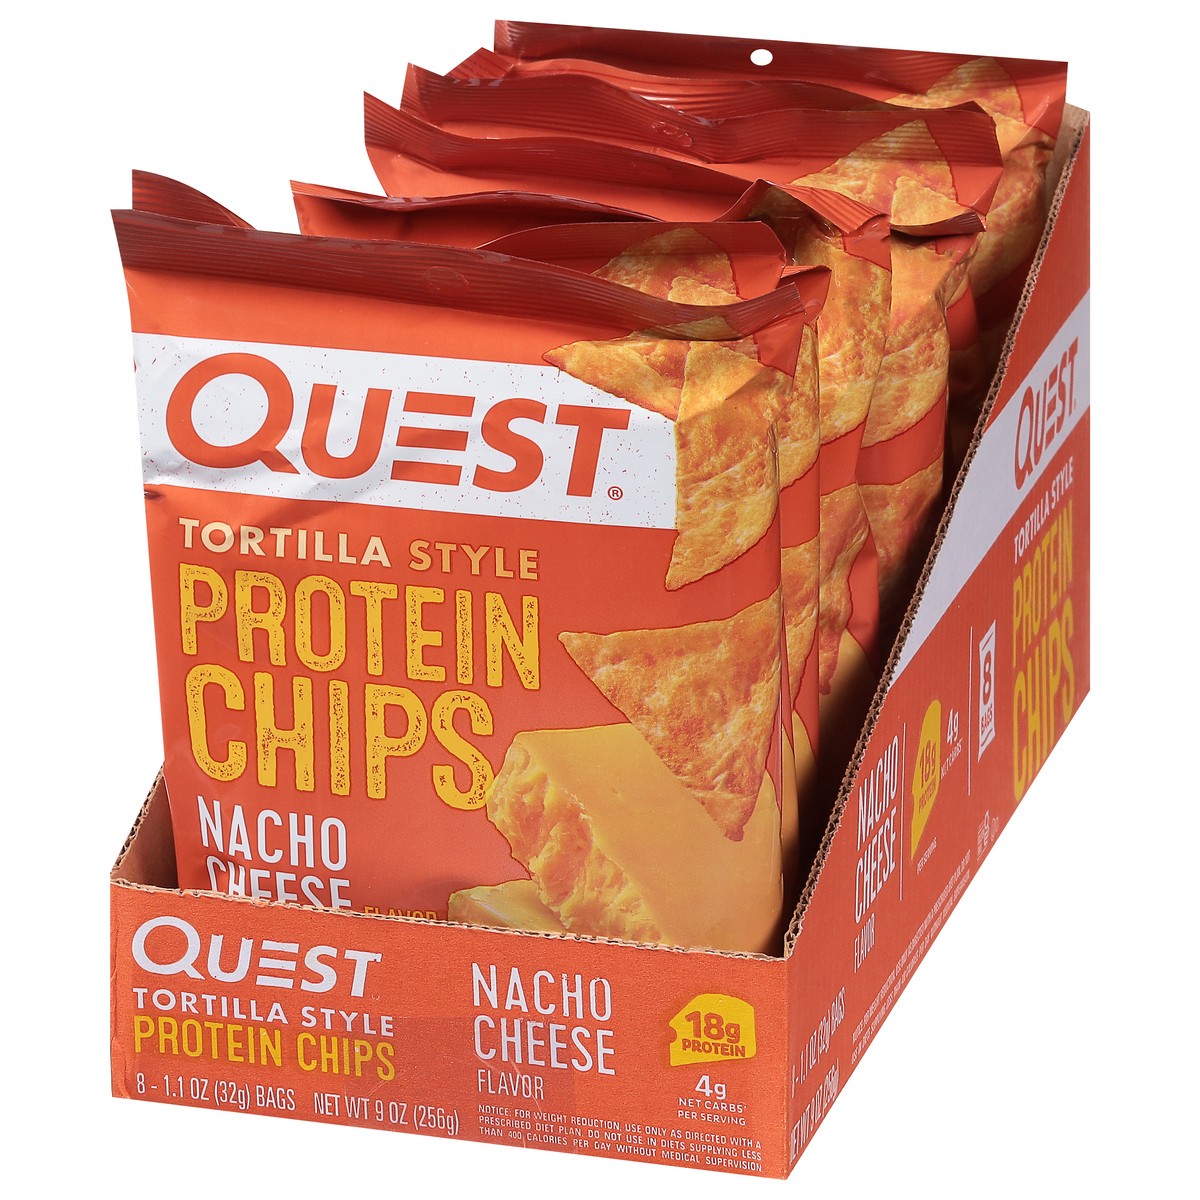 slide 3 of 9, Quest Tortilla Style Nacho Cheese Flavor Protein Chips 8 - 1.1 oz Bags, 9 oz